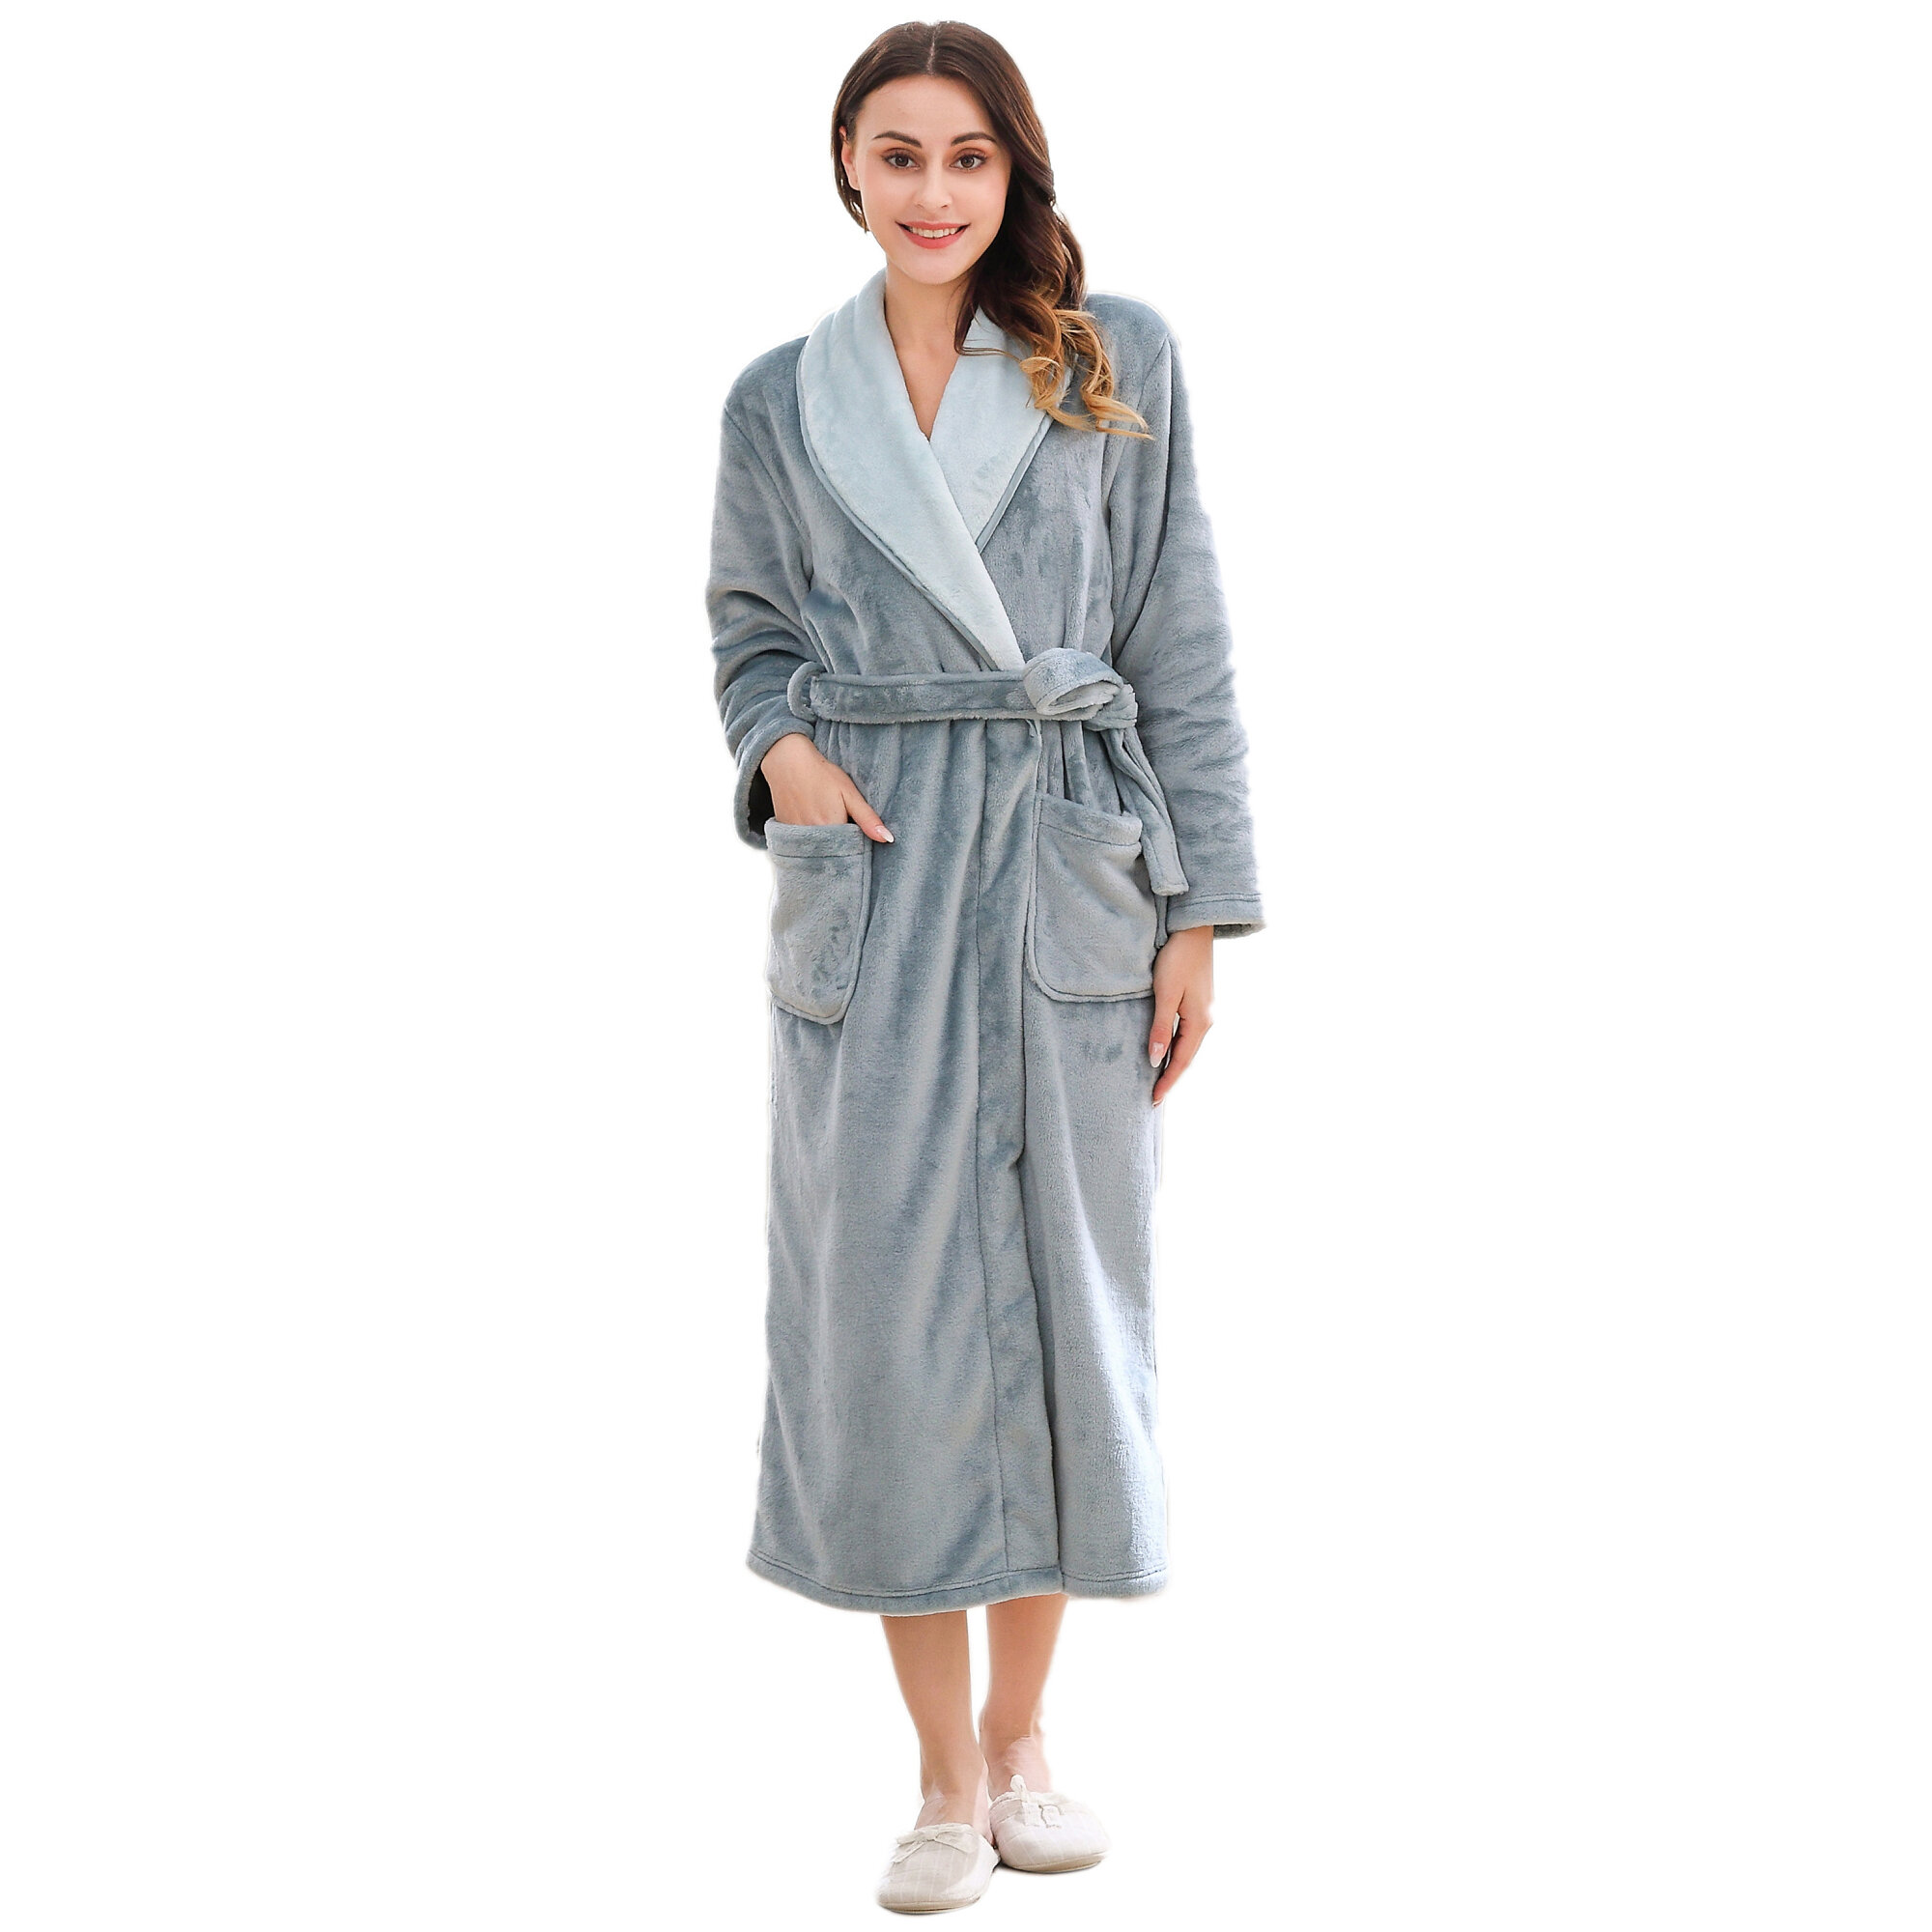 Down Robe - Gray, Size S, Cotton,Cotton Sateen | The Company Store